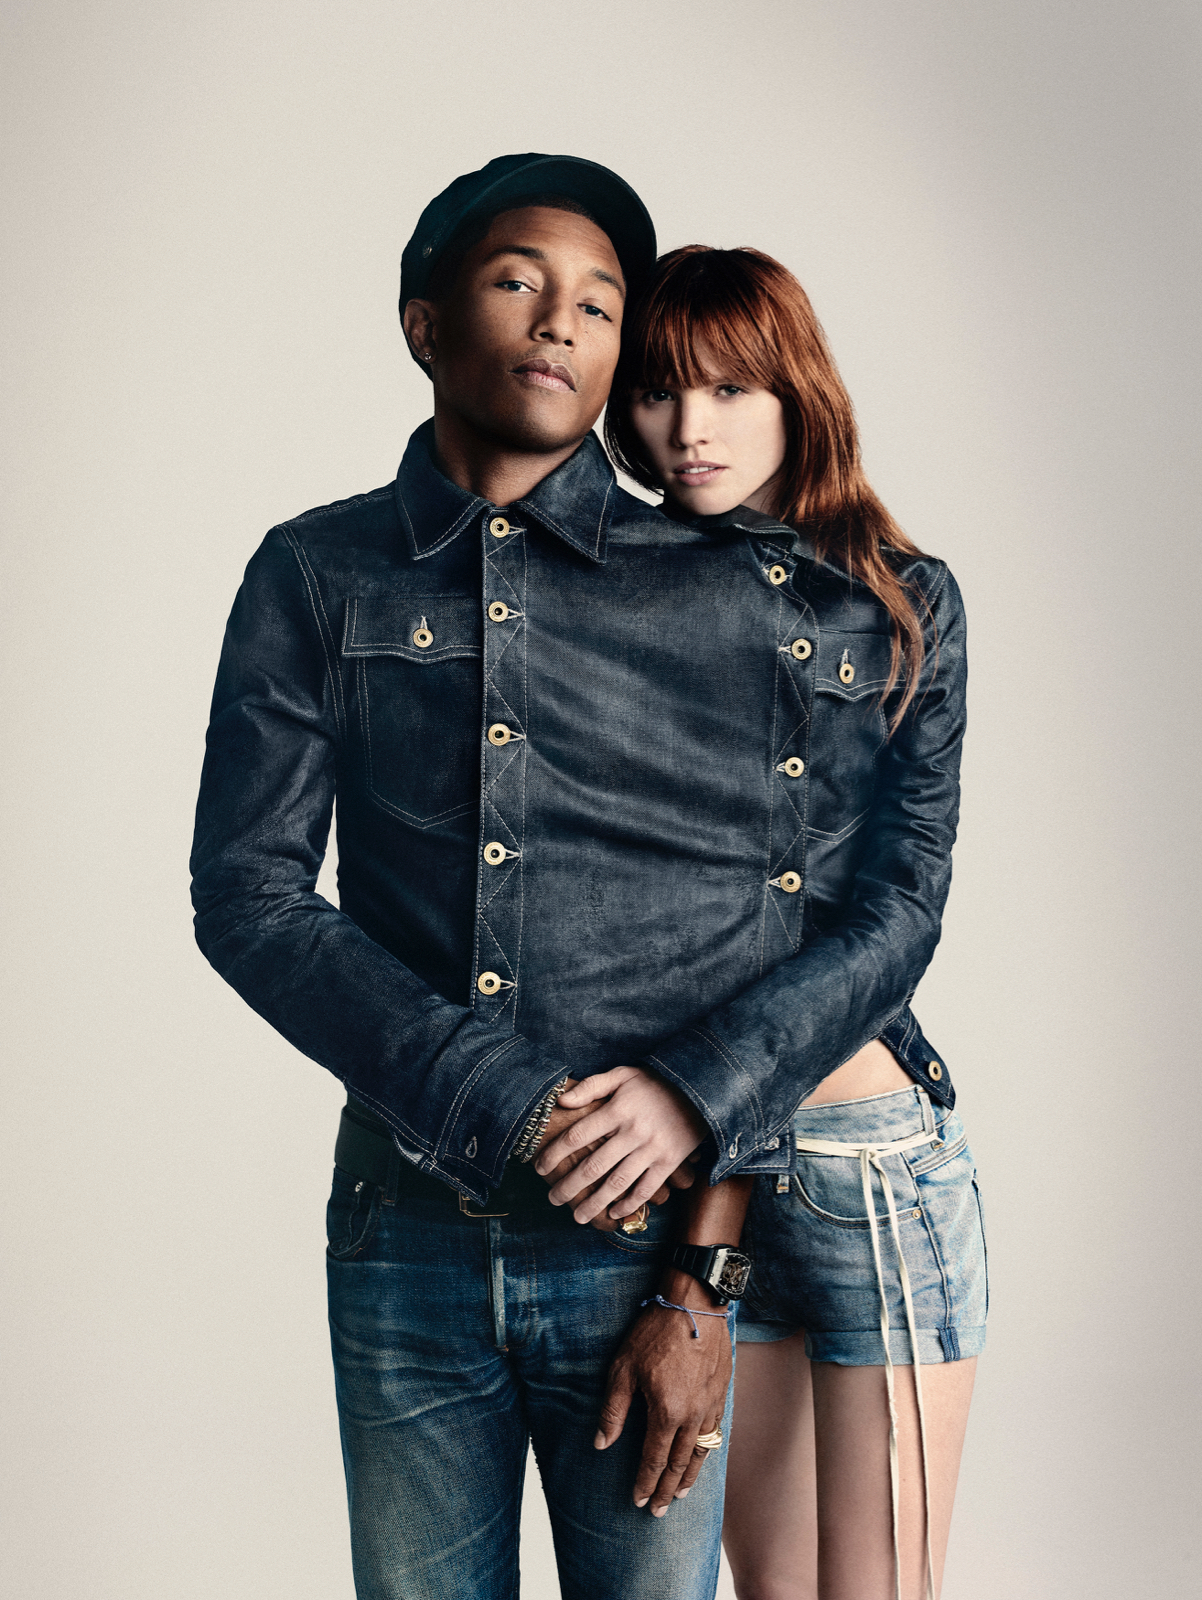 Pharrell Williams becomes co-owner of G 